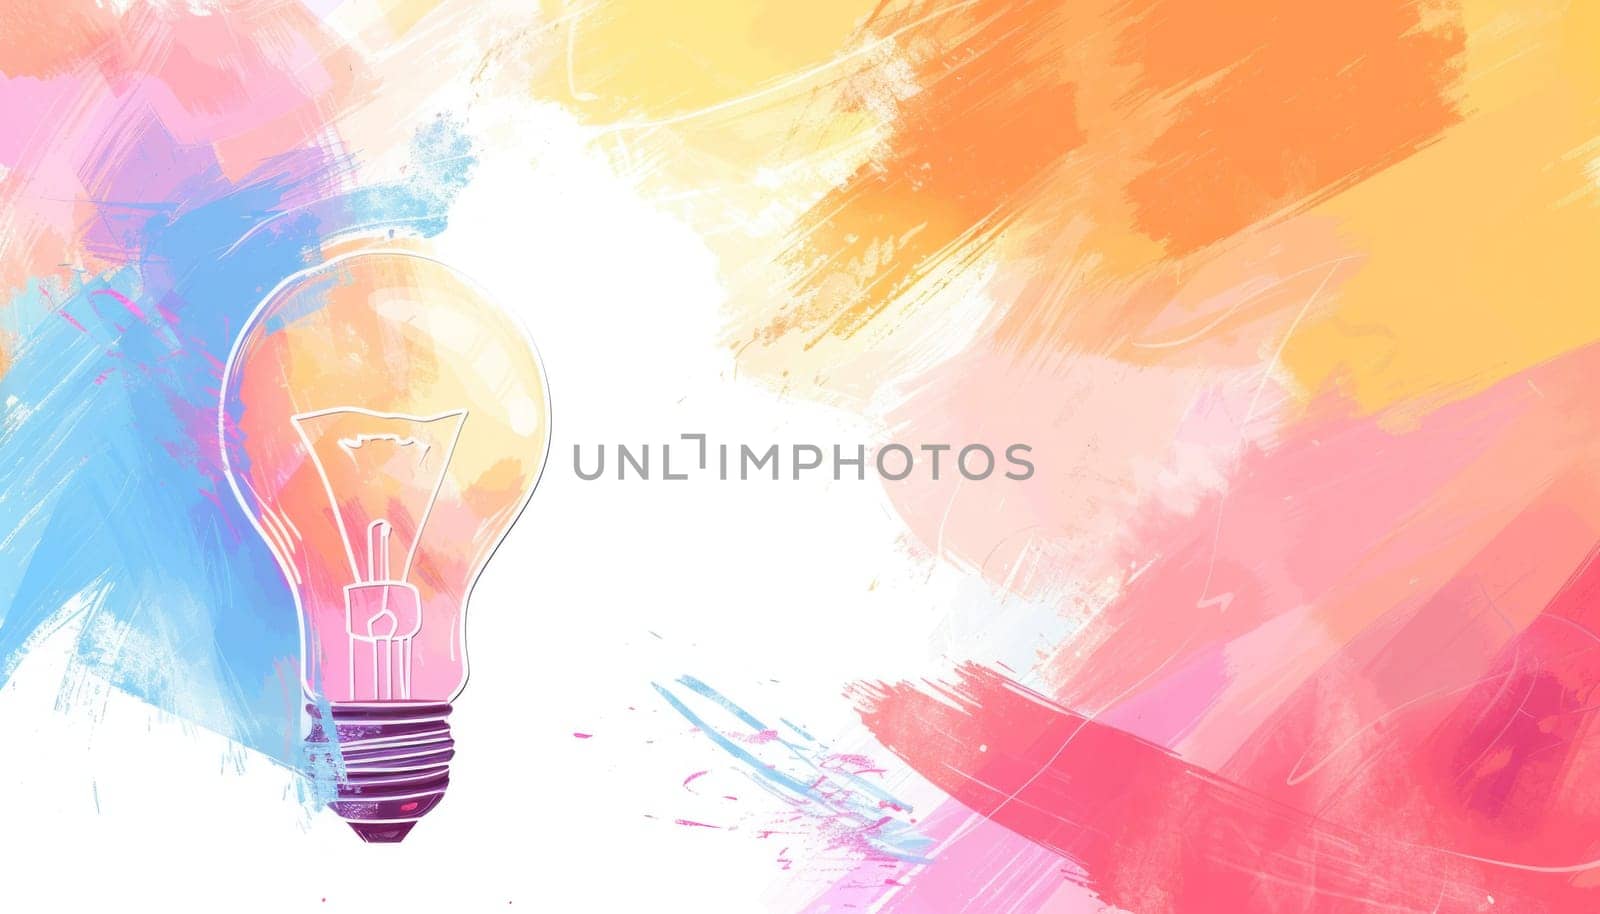 Inspired light bulb in vibrant splatter paint background illumination and creativity concept art design energy and ideas conceptual artistic canvas beauty of imagination and colorful innovation